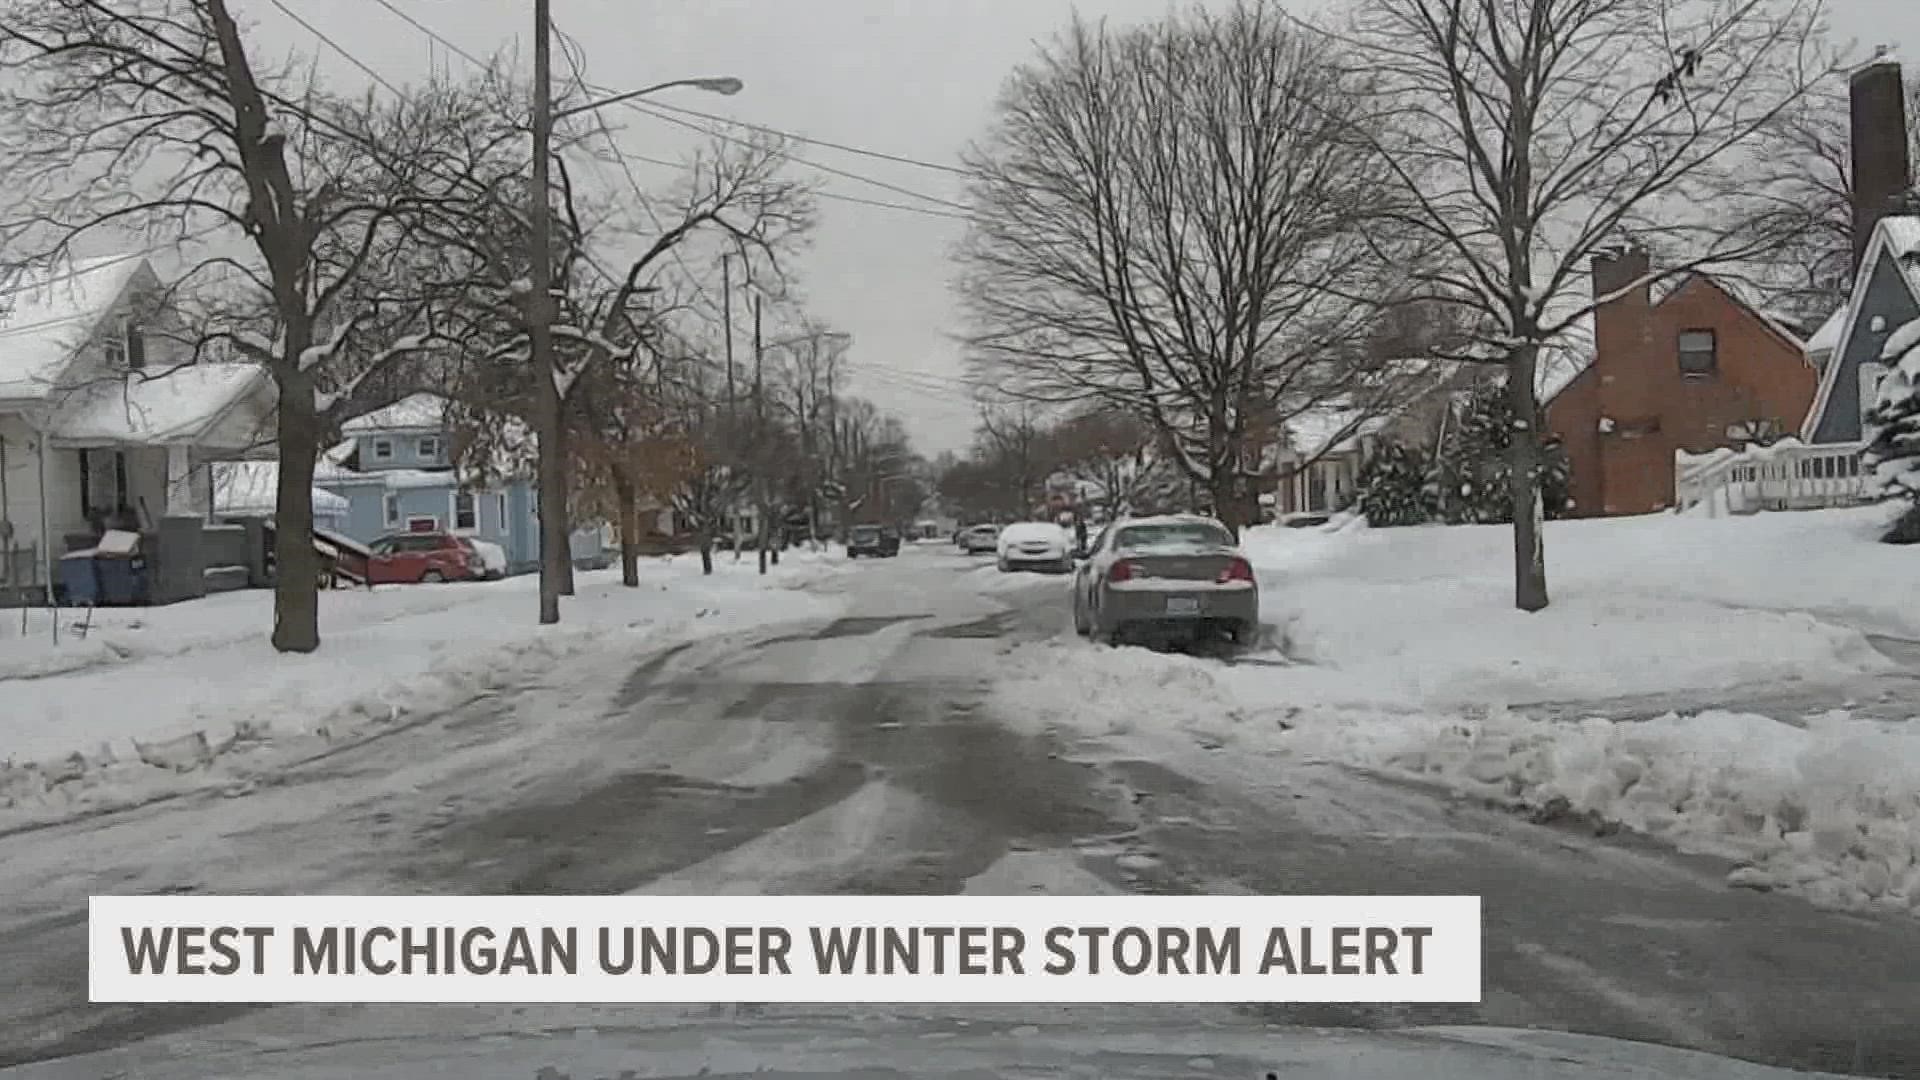 We're about 48 hours away from a major winter storm and preparations have already begun.